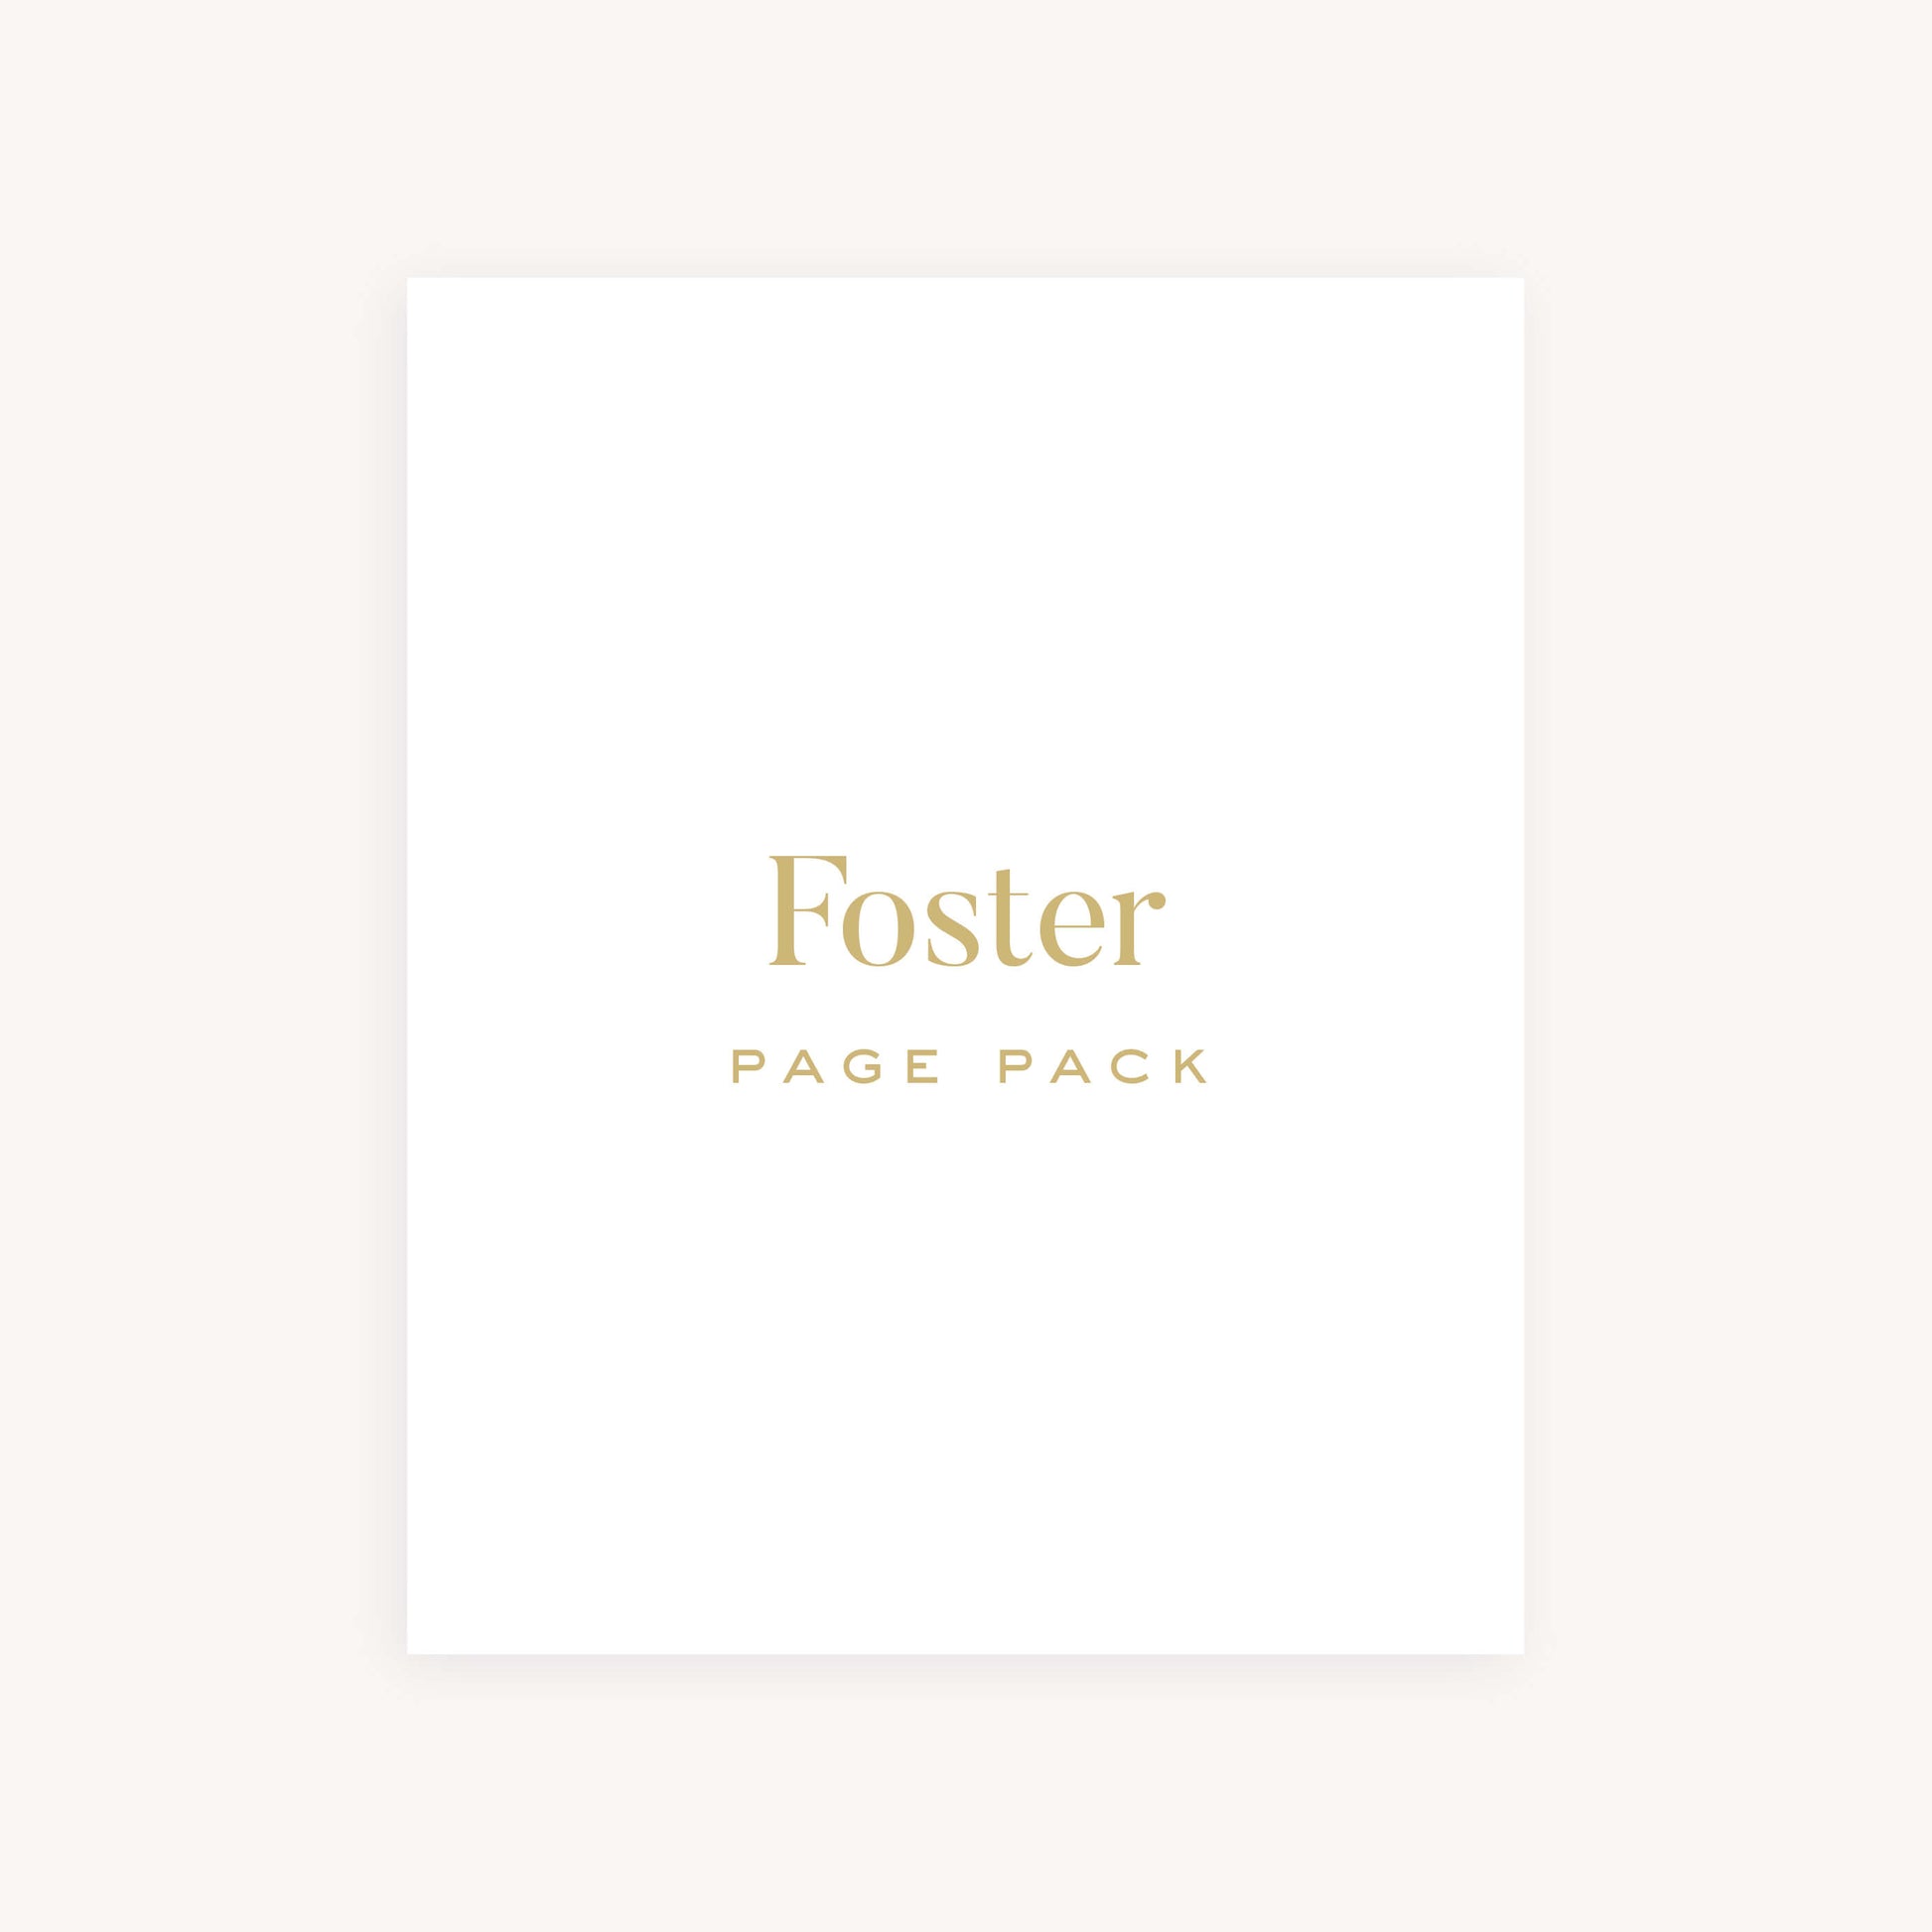 FOSTER CARE BABY BOOK PAGE PACK